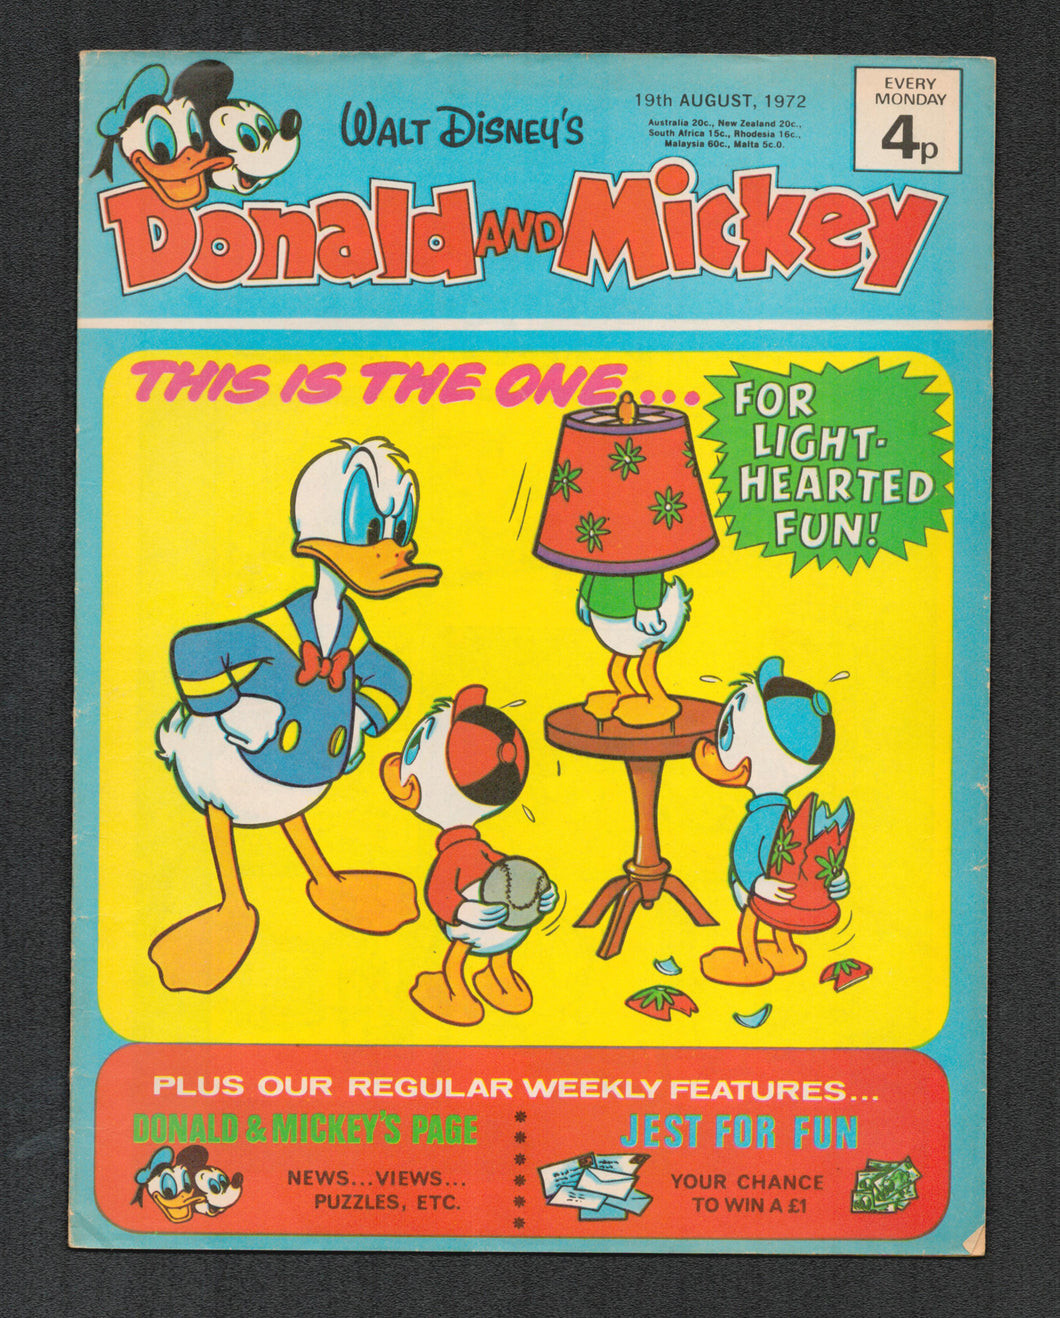 Donald and Mickey Aug 19 1972